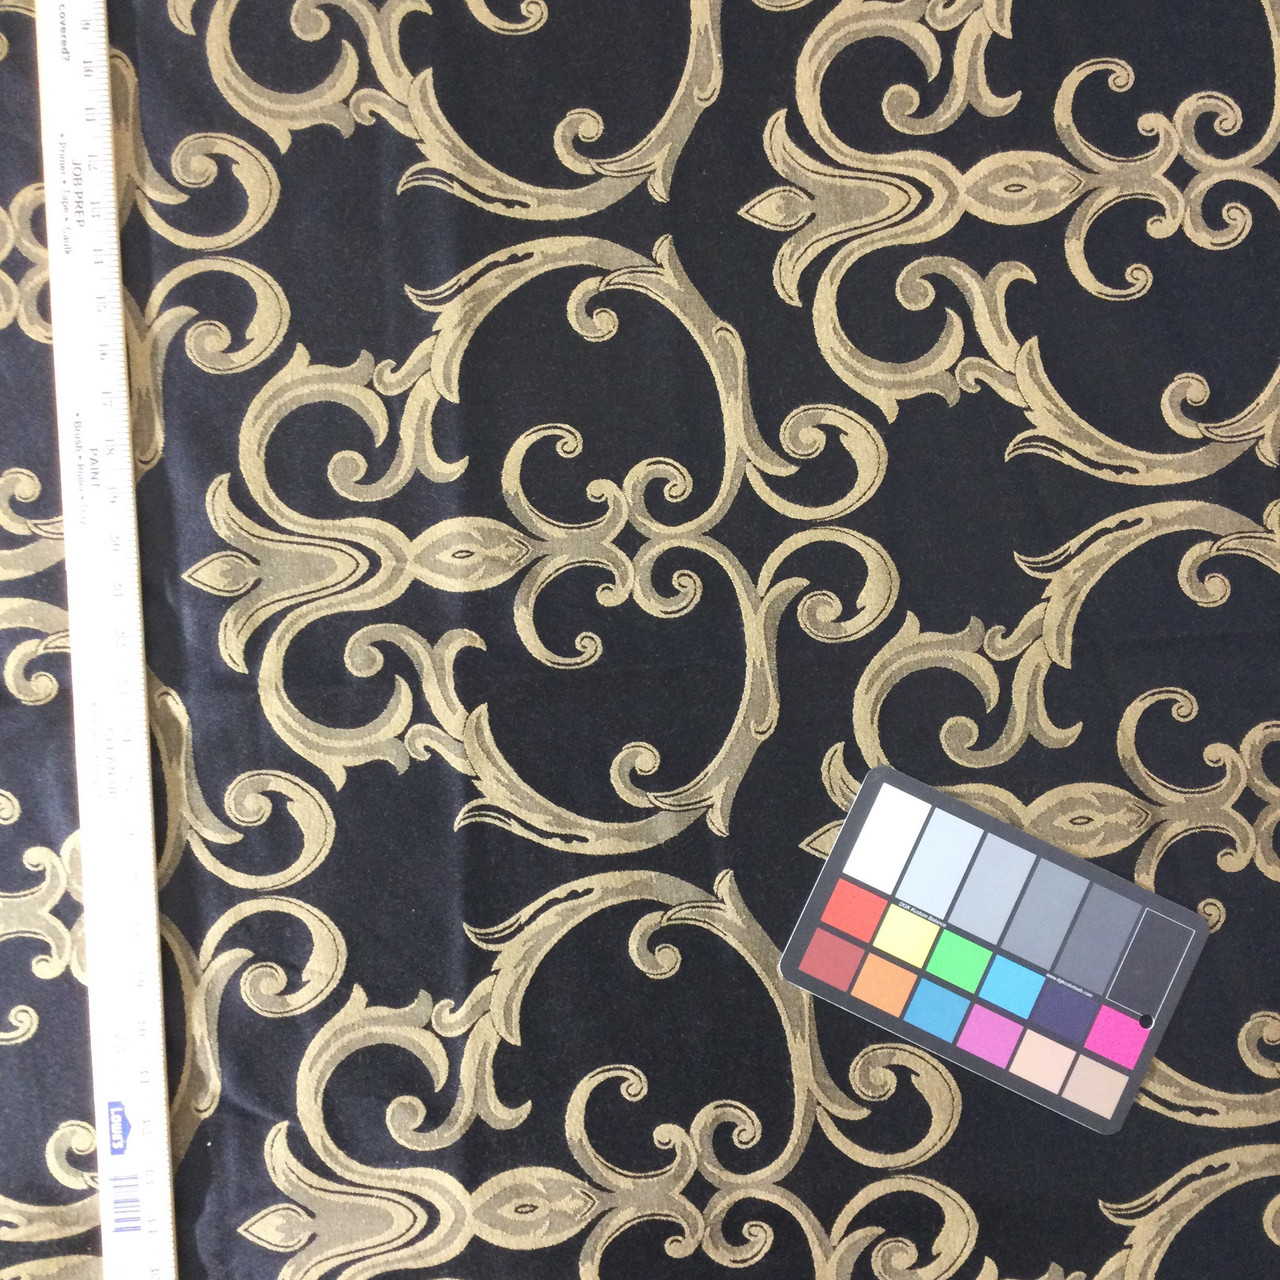 Scrollwork in Black / Tan, Upholstery Fabric, 54 Wide